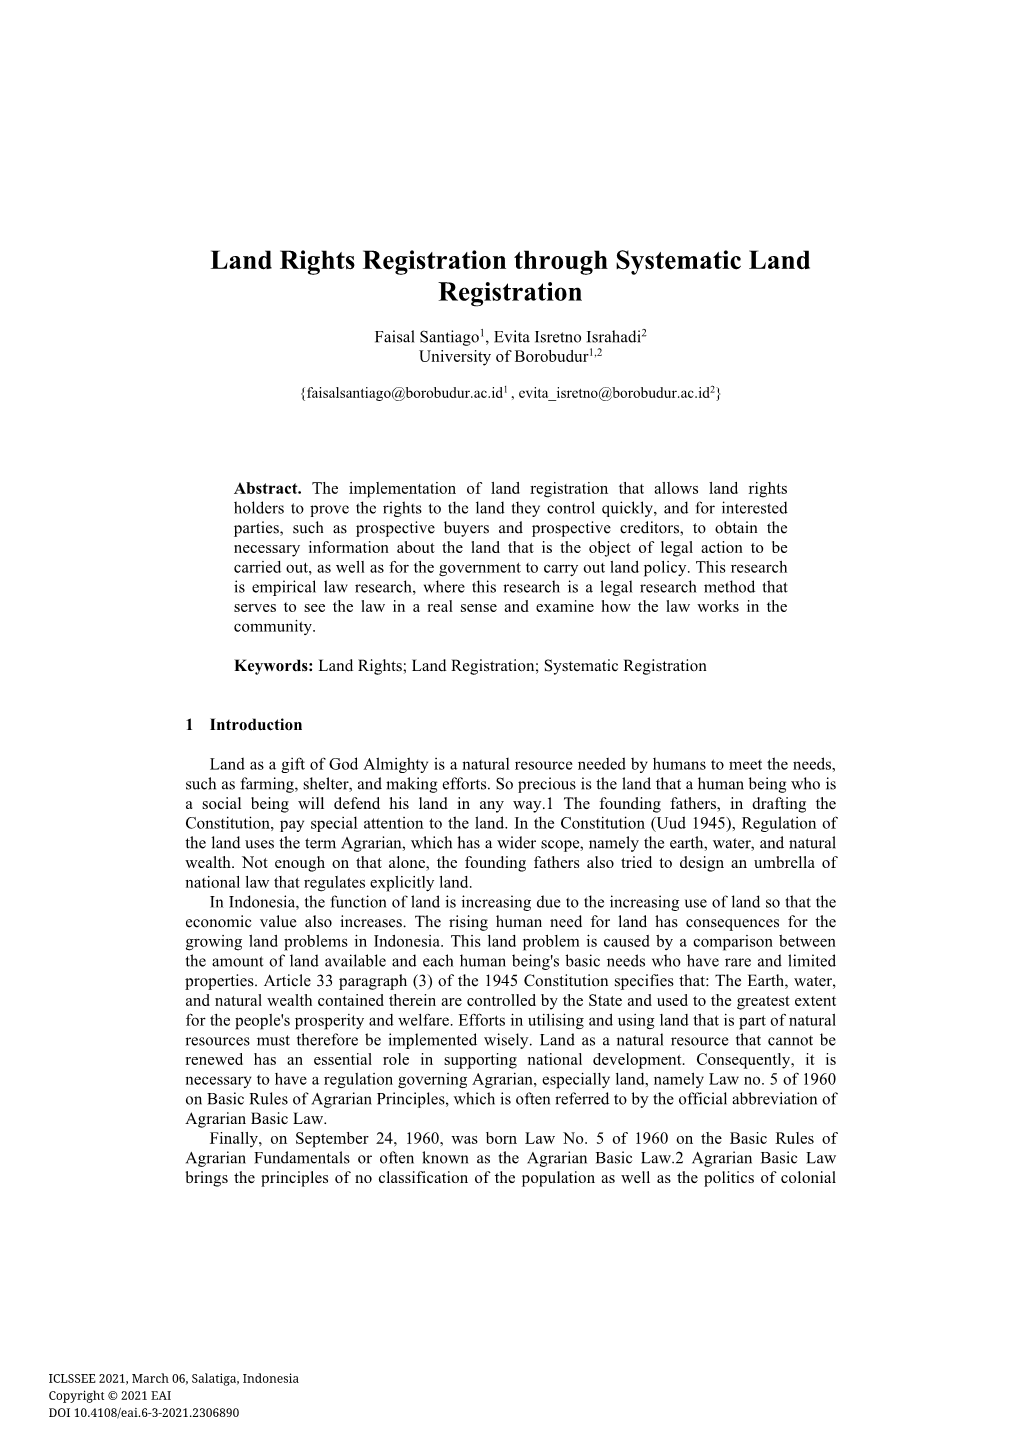 Land Rights Registration Through Systematic Land Registration